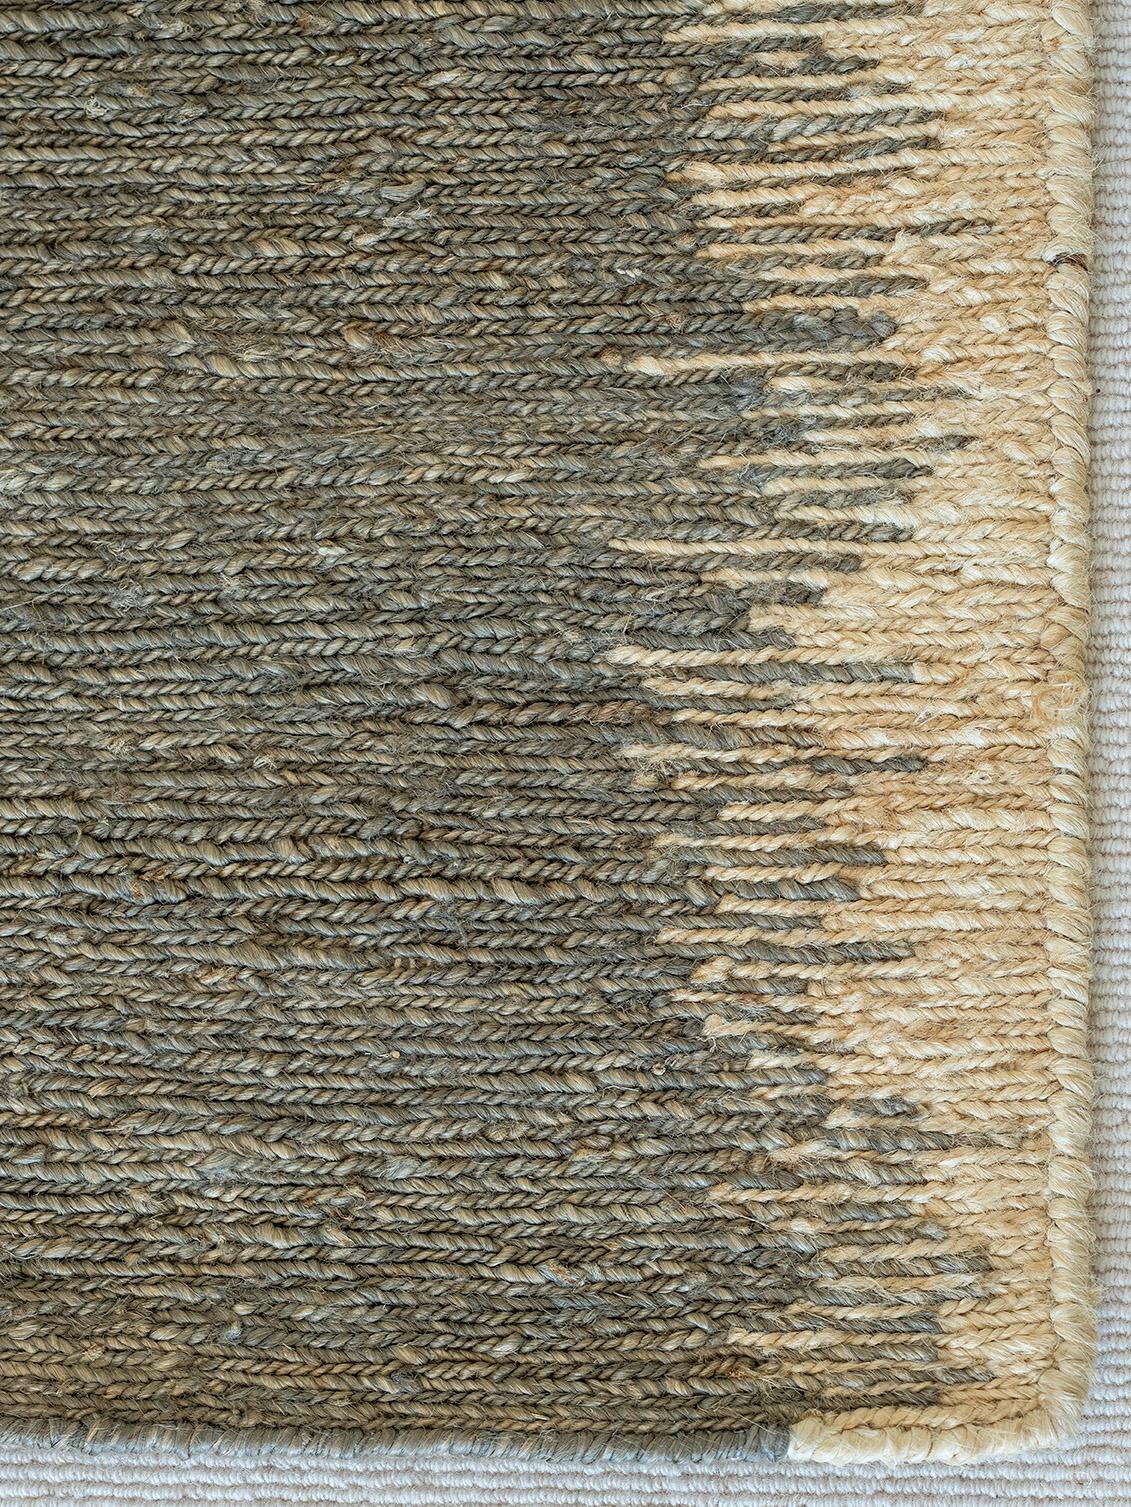 Contemporary Modern Hand Braided Jute Carpet Rug in Grey&Ivory degraded Shades For Sale